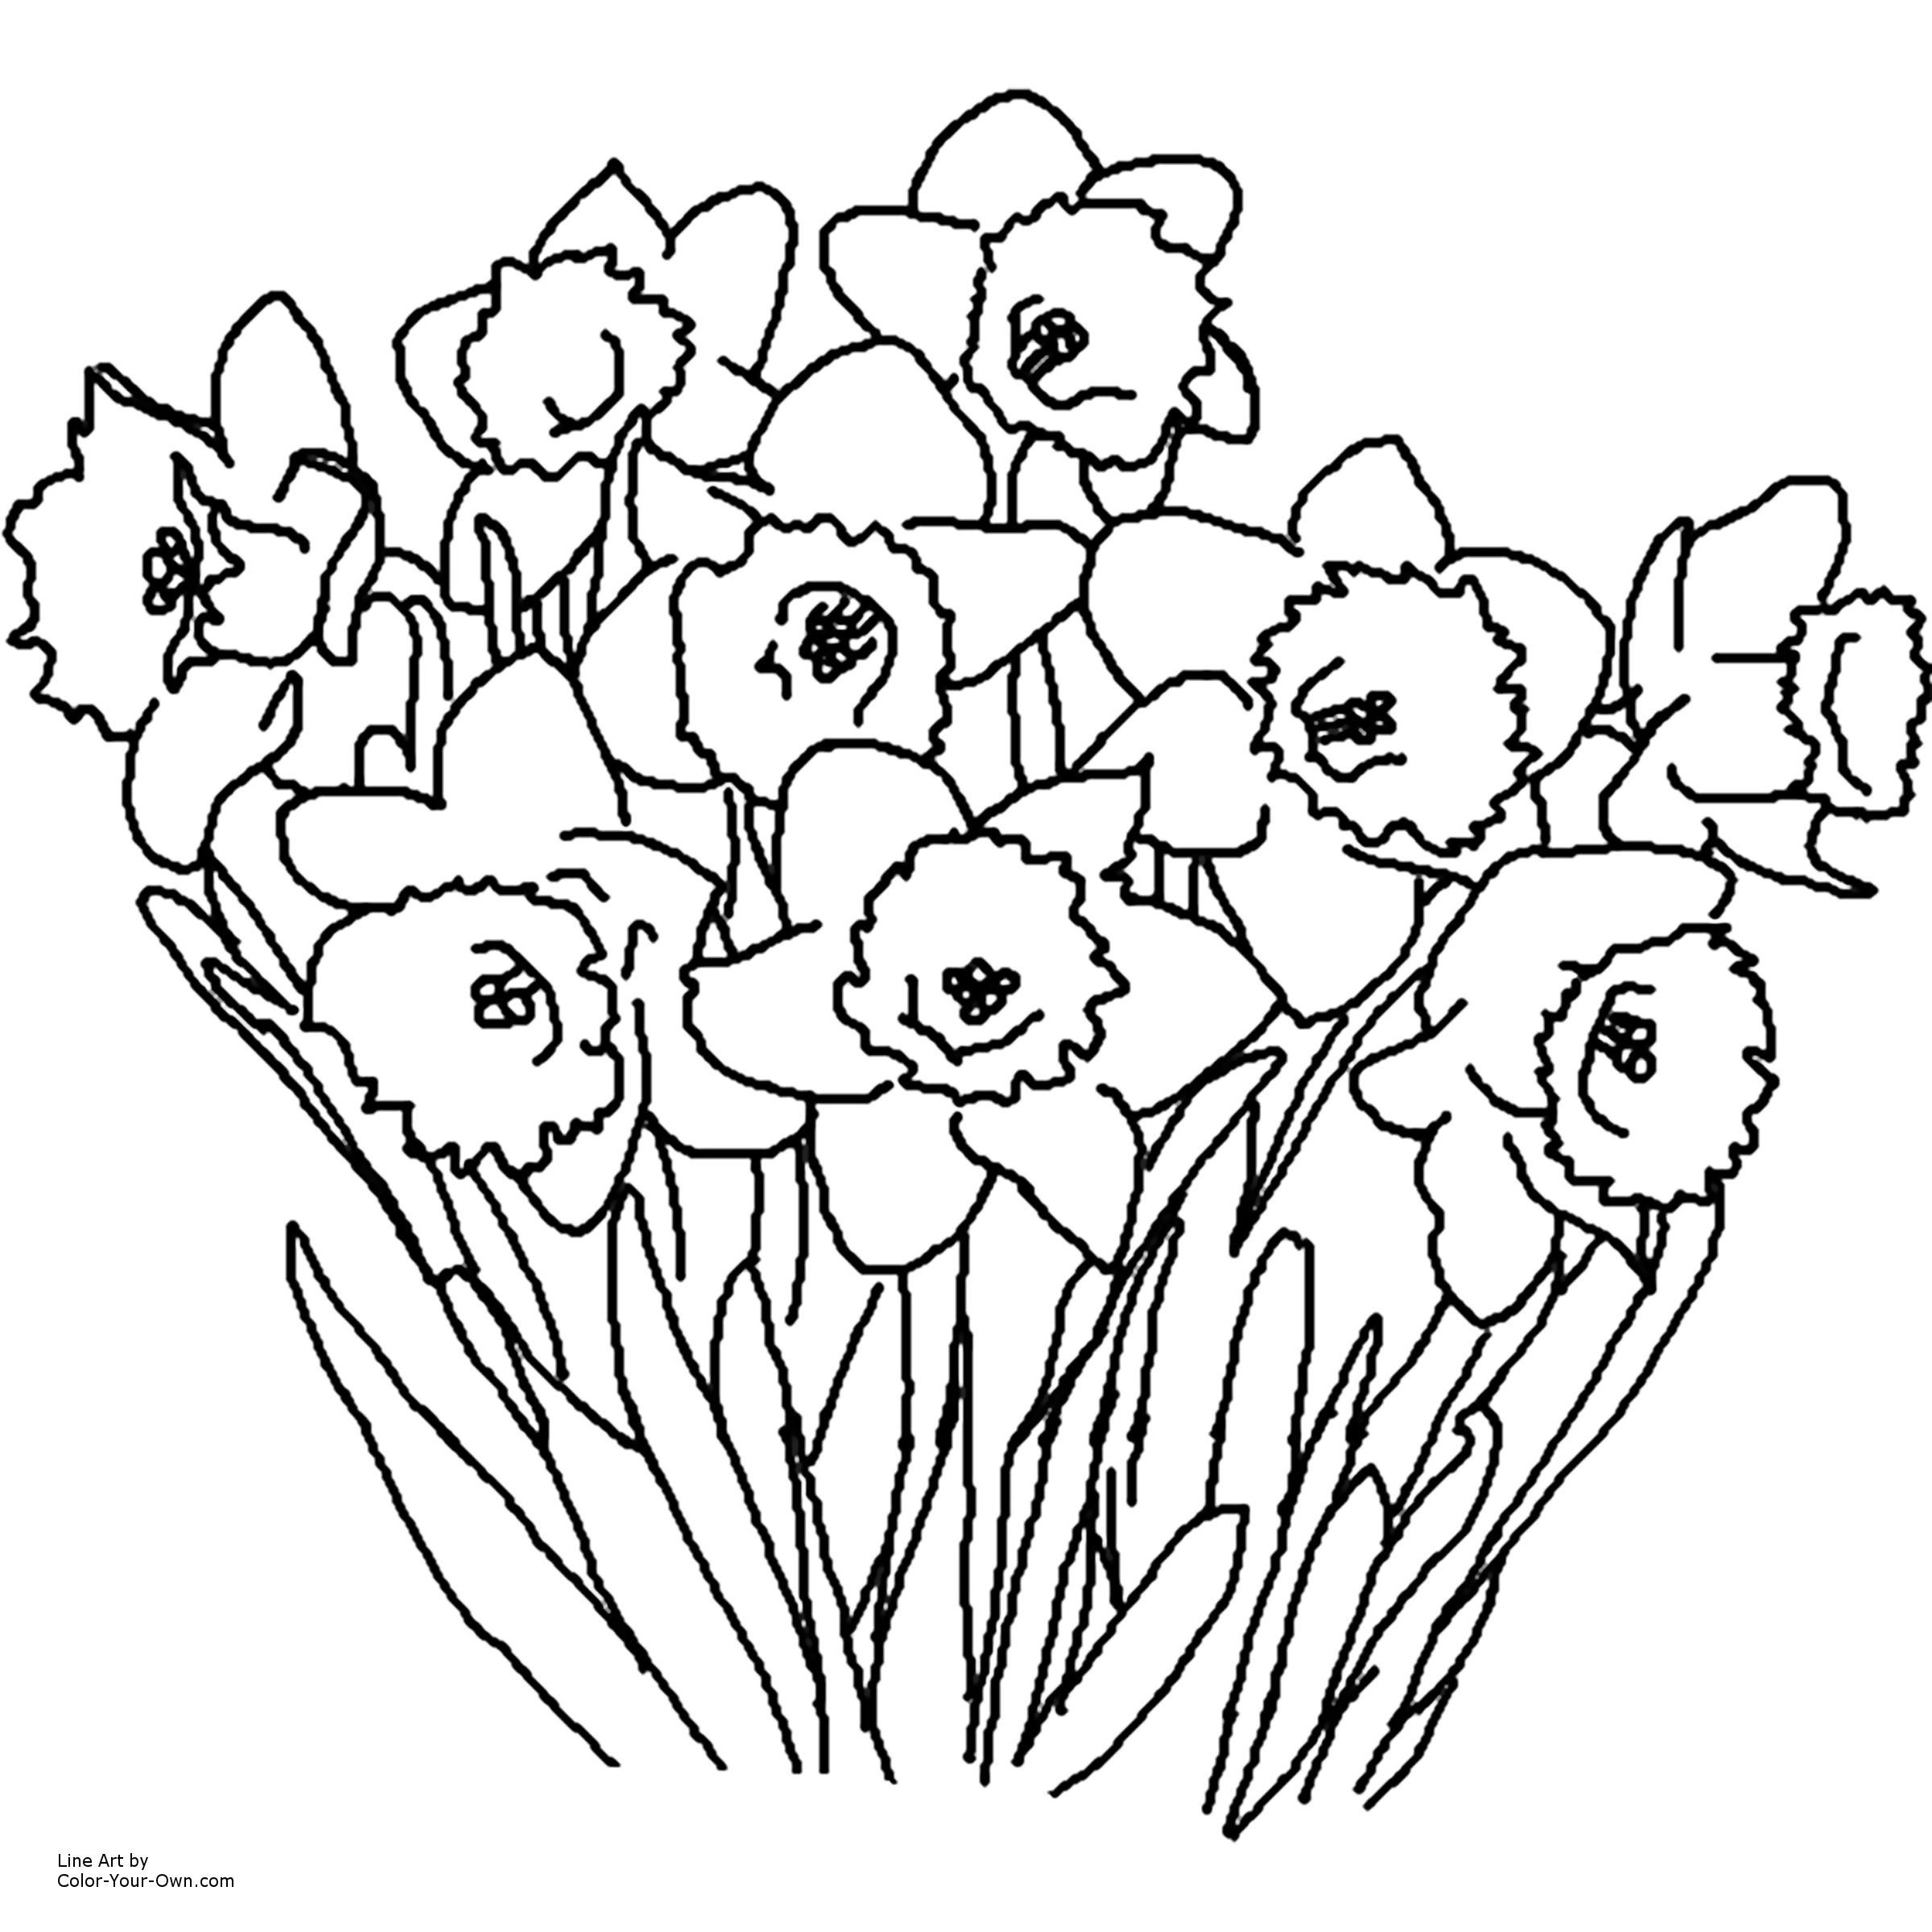 Daffodil Coloring Page. How To Draw A Tiger Lily Stepstep - Free Printable Pictures Of Daffodils